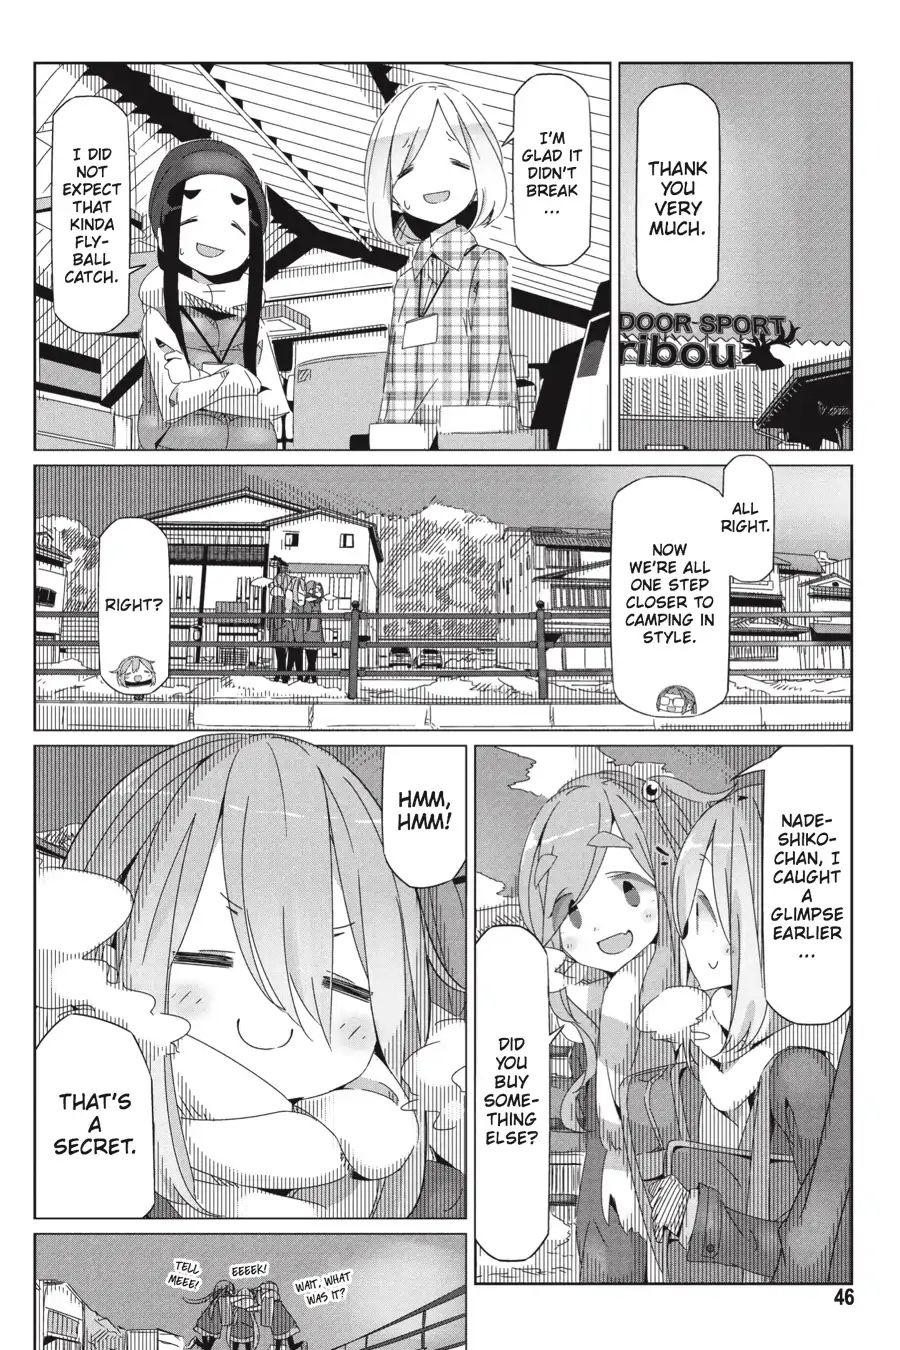 Yurucamp Vol.6 Chapter 30: The Lamp and the Heat Packs